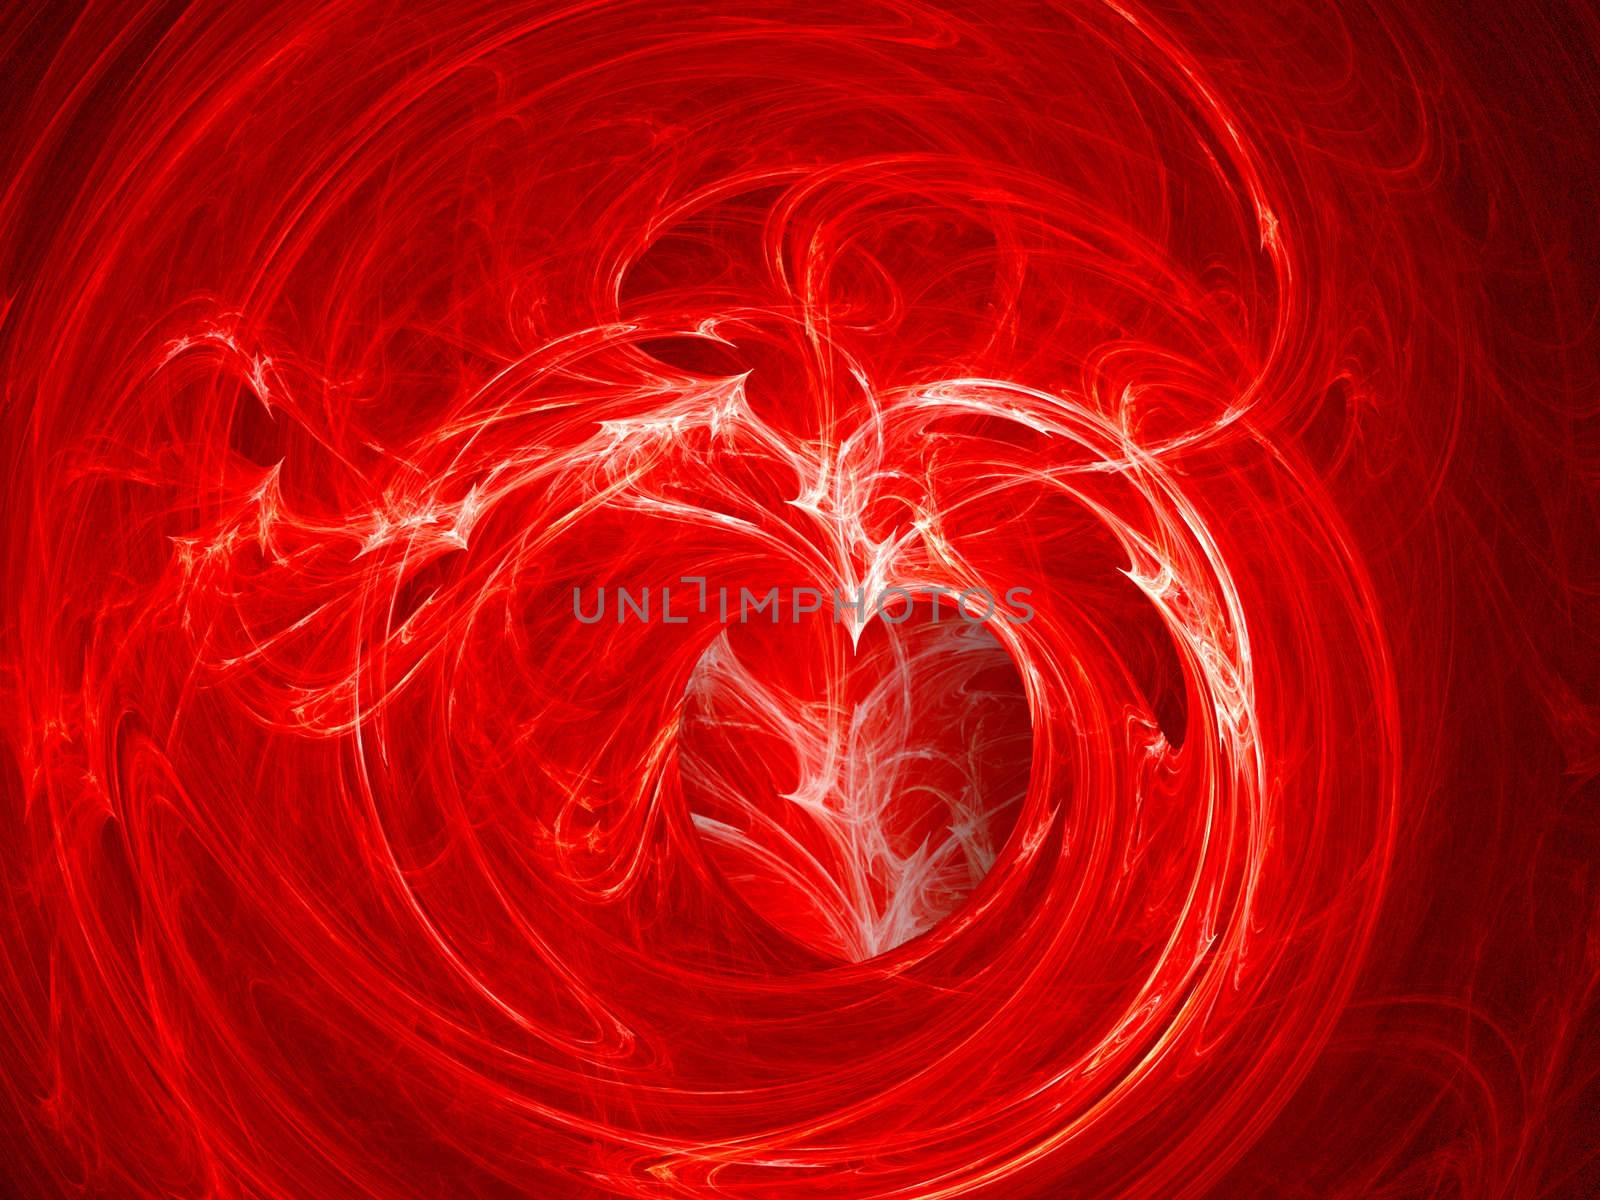 Fractal Swirly Heart on Fire Background by bobbigmac